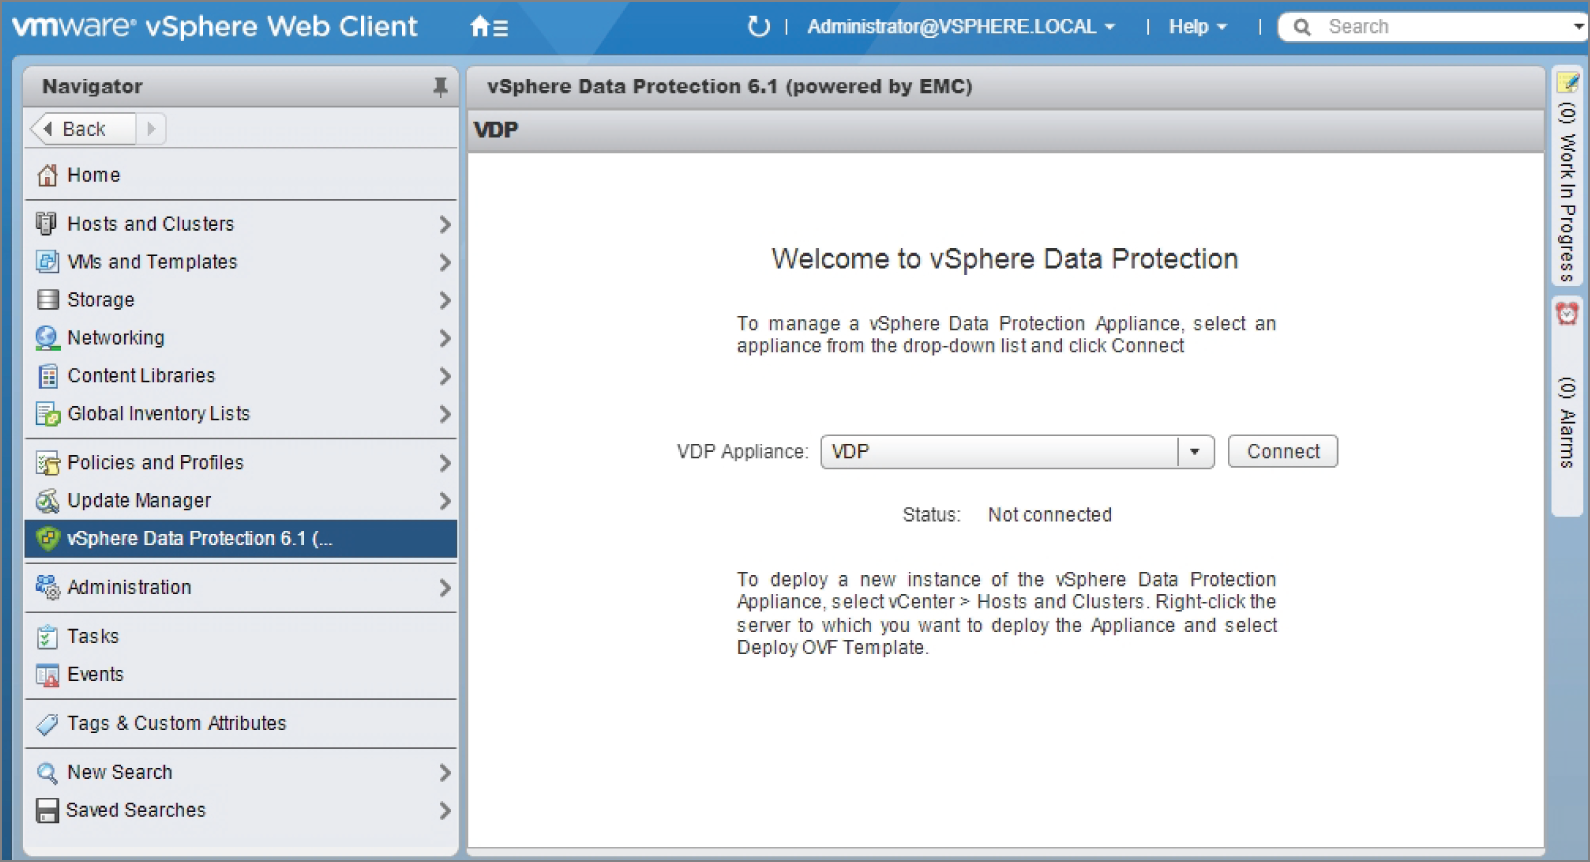 Snapshot of logging into vCenter and connect to the VDP appliance from the vSphere Data Protection menu.